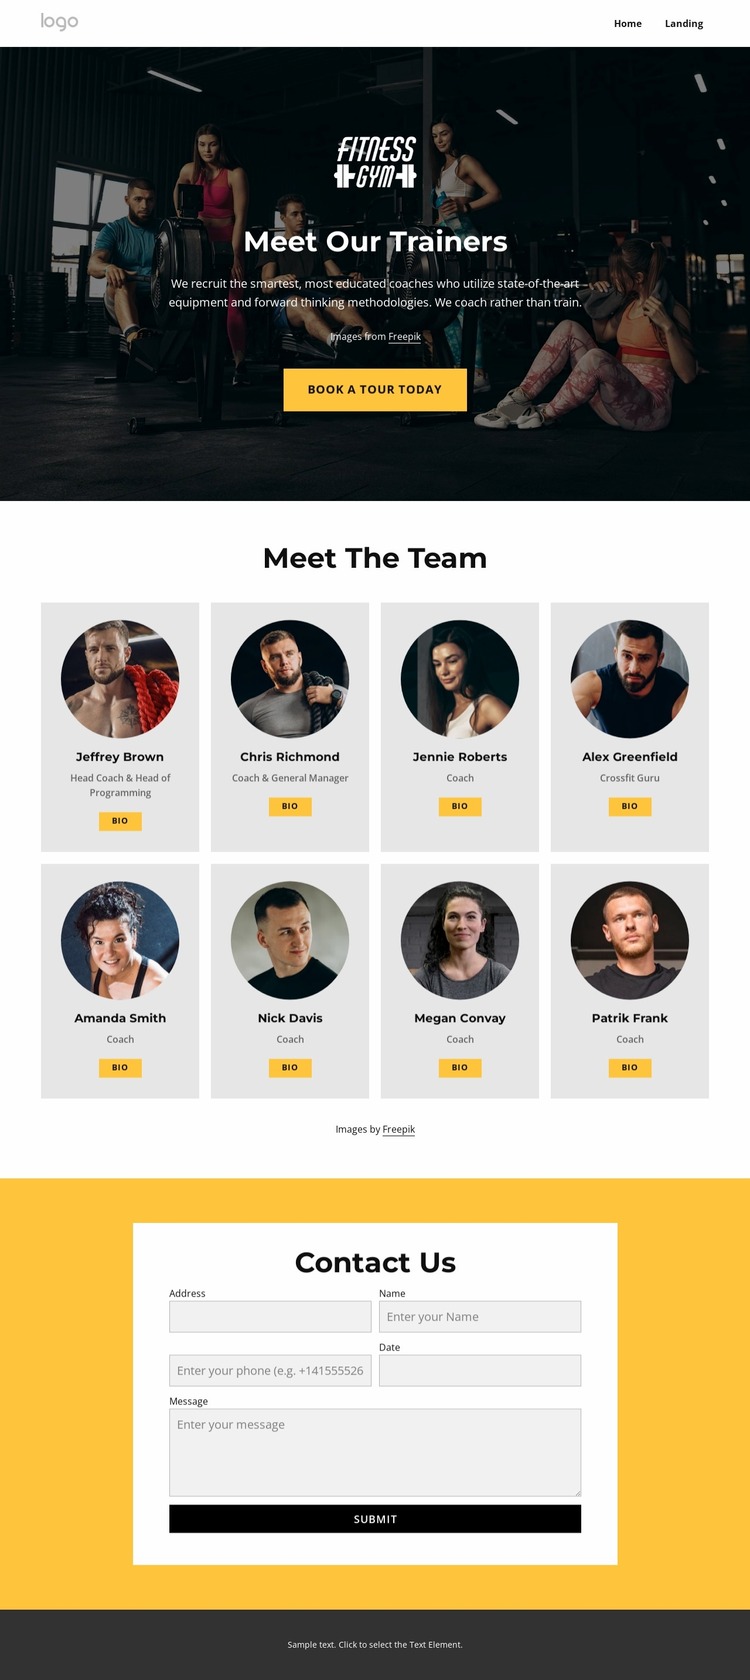 Meet our trainers Website Mockup